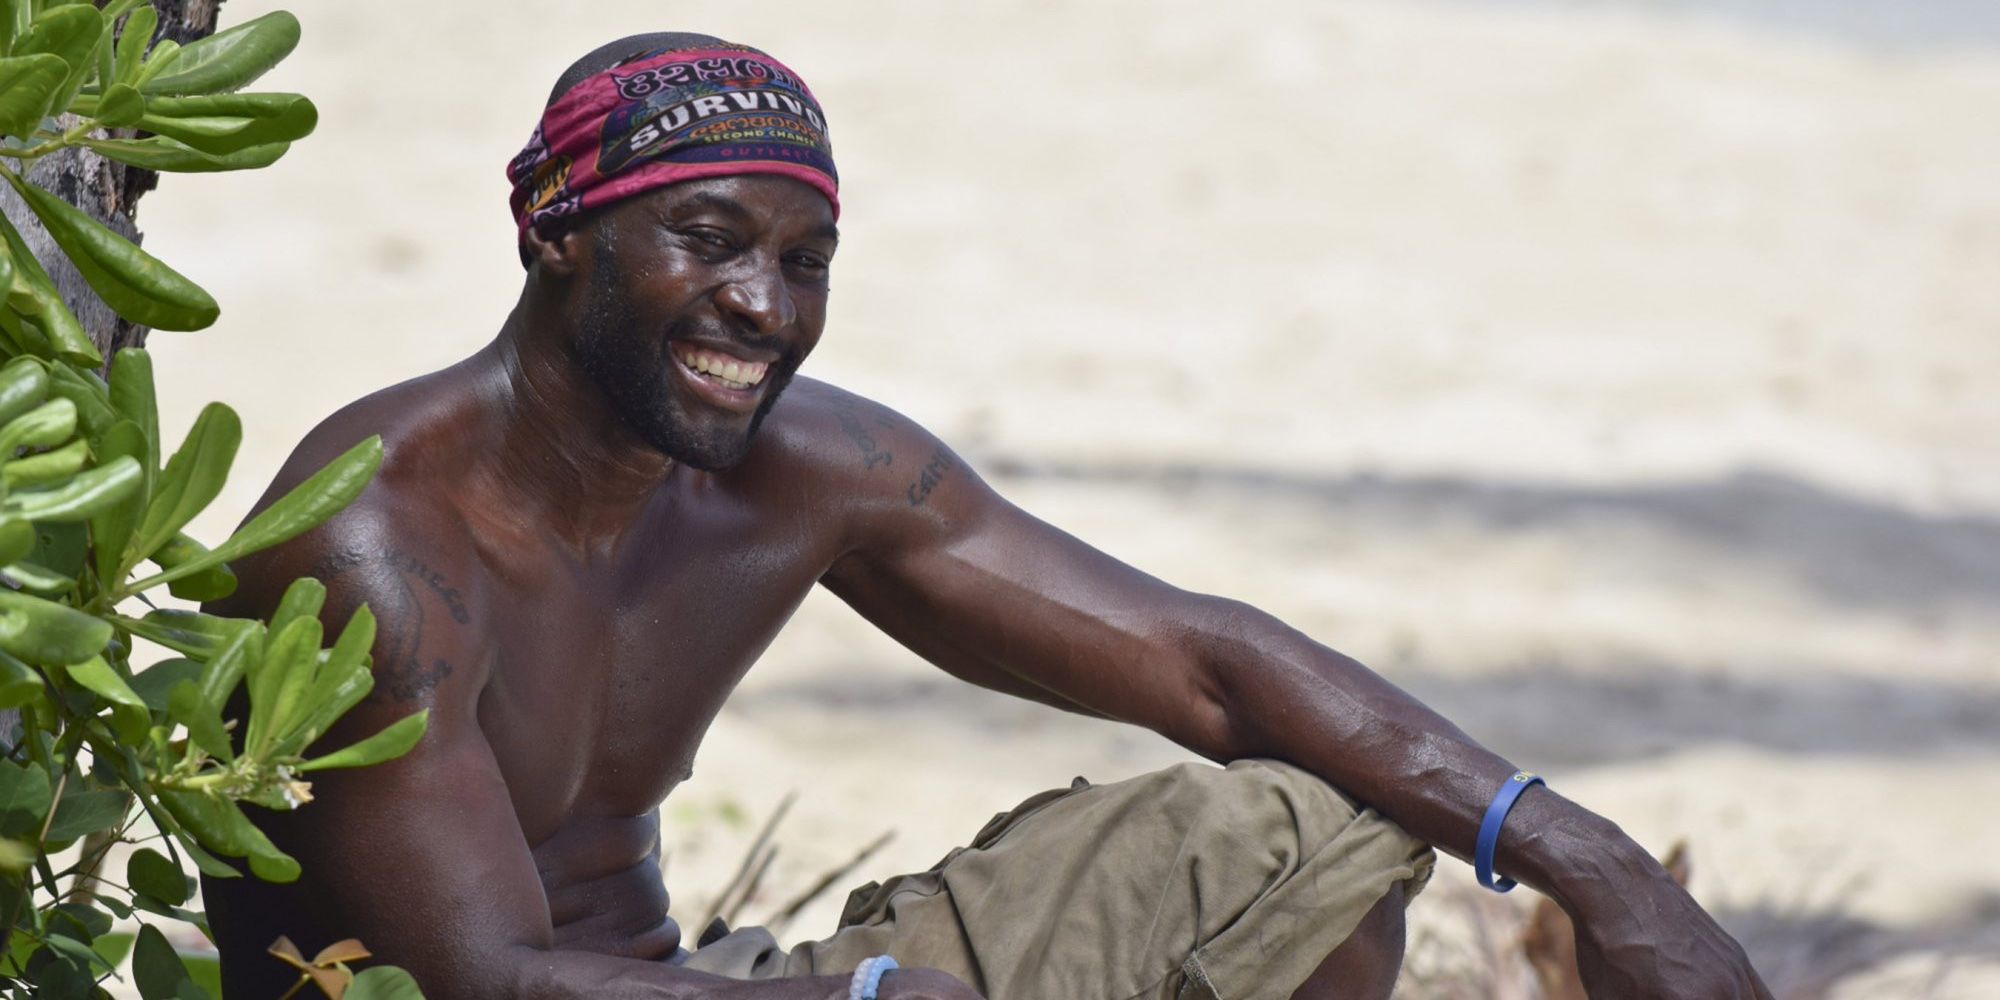 Jeremy Collins from Survivor, sitting on the island, smiling.